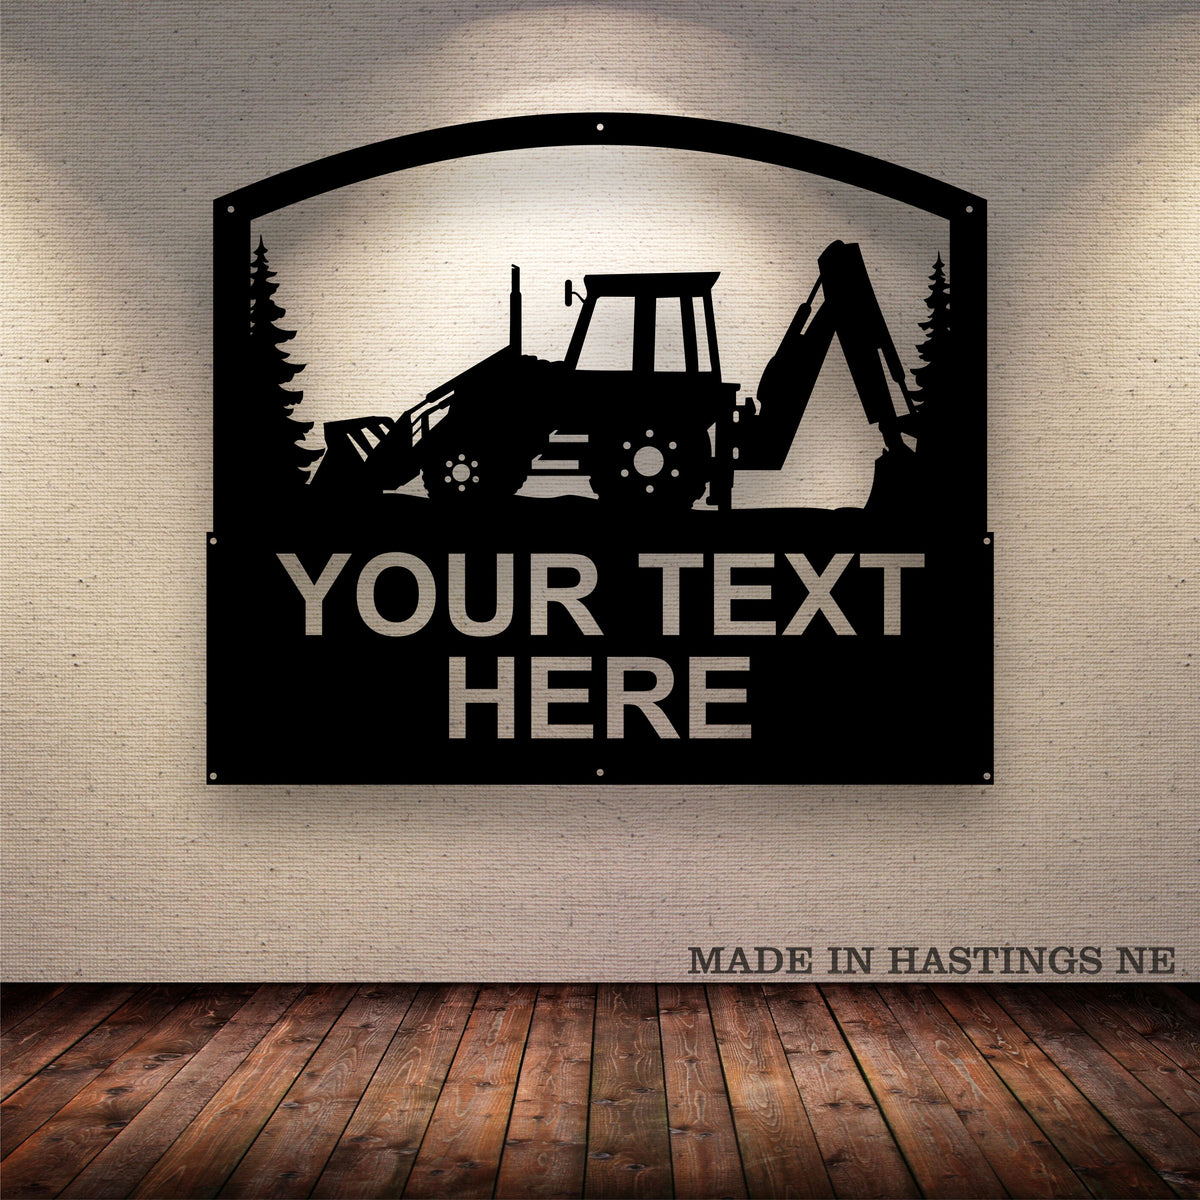 Backhoe Your Text Here Metal Wall Art Free Shipping